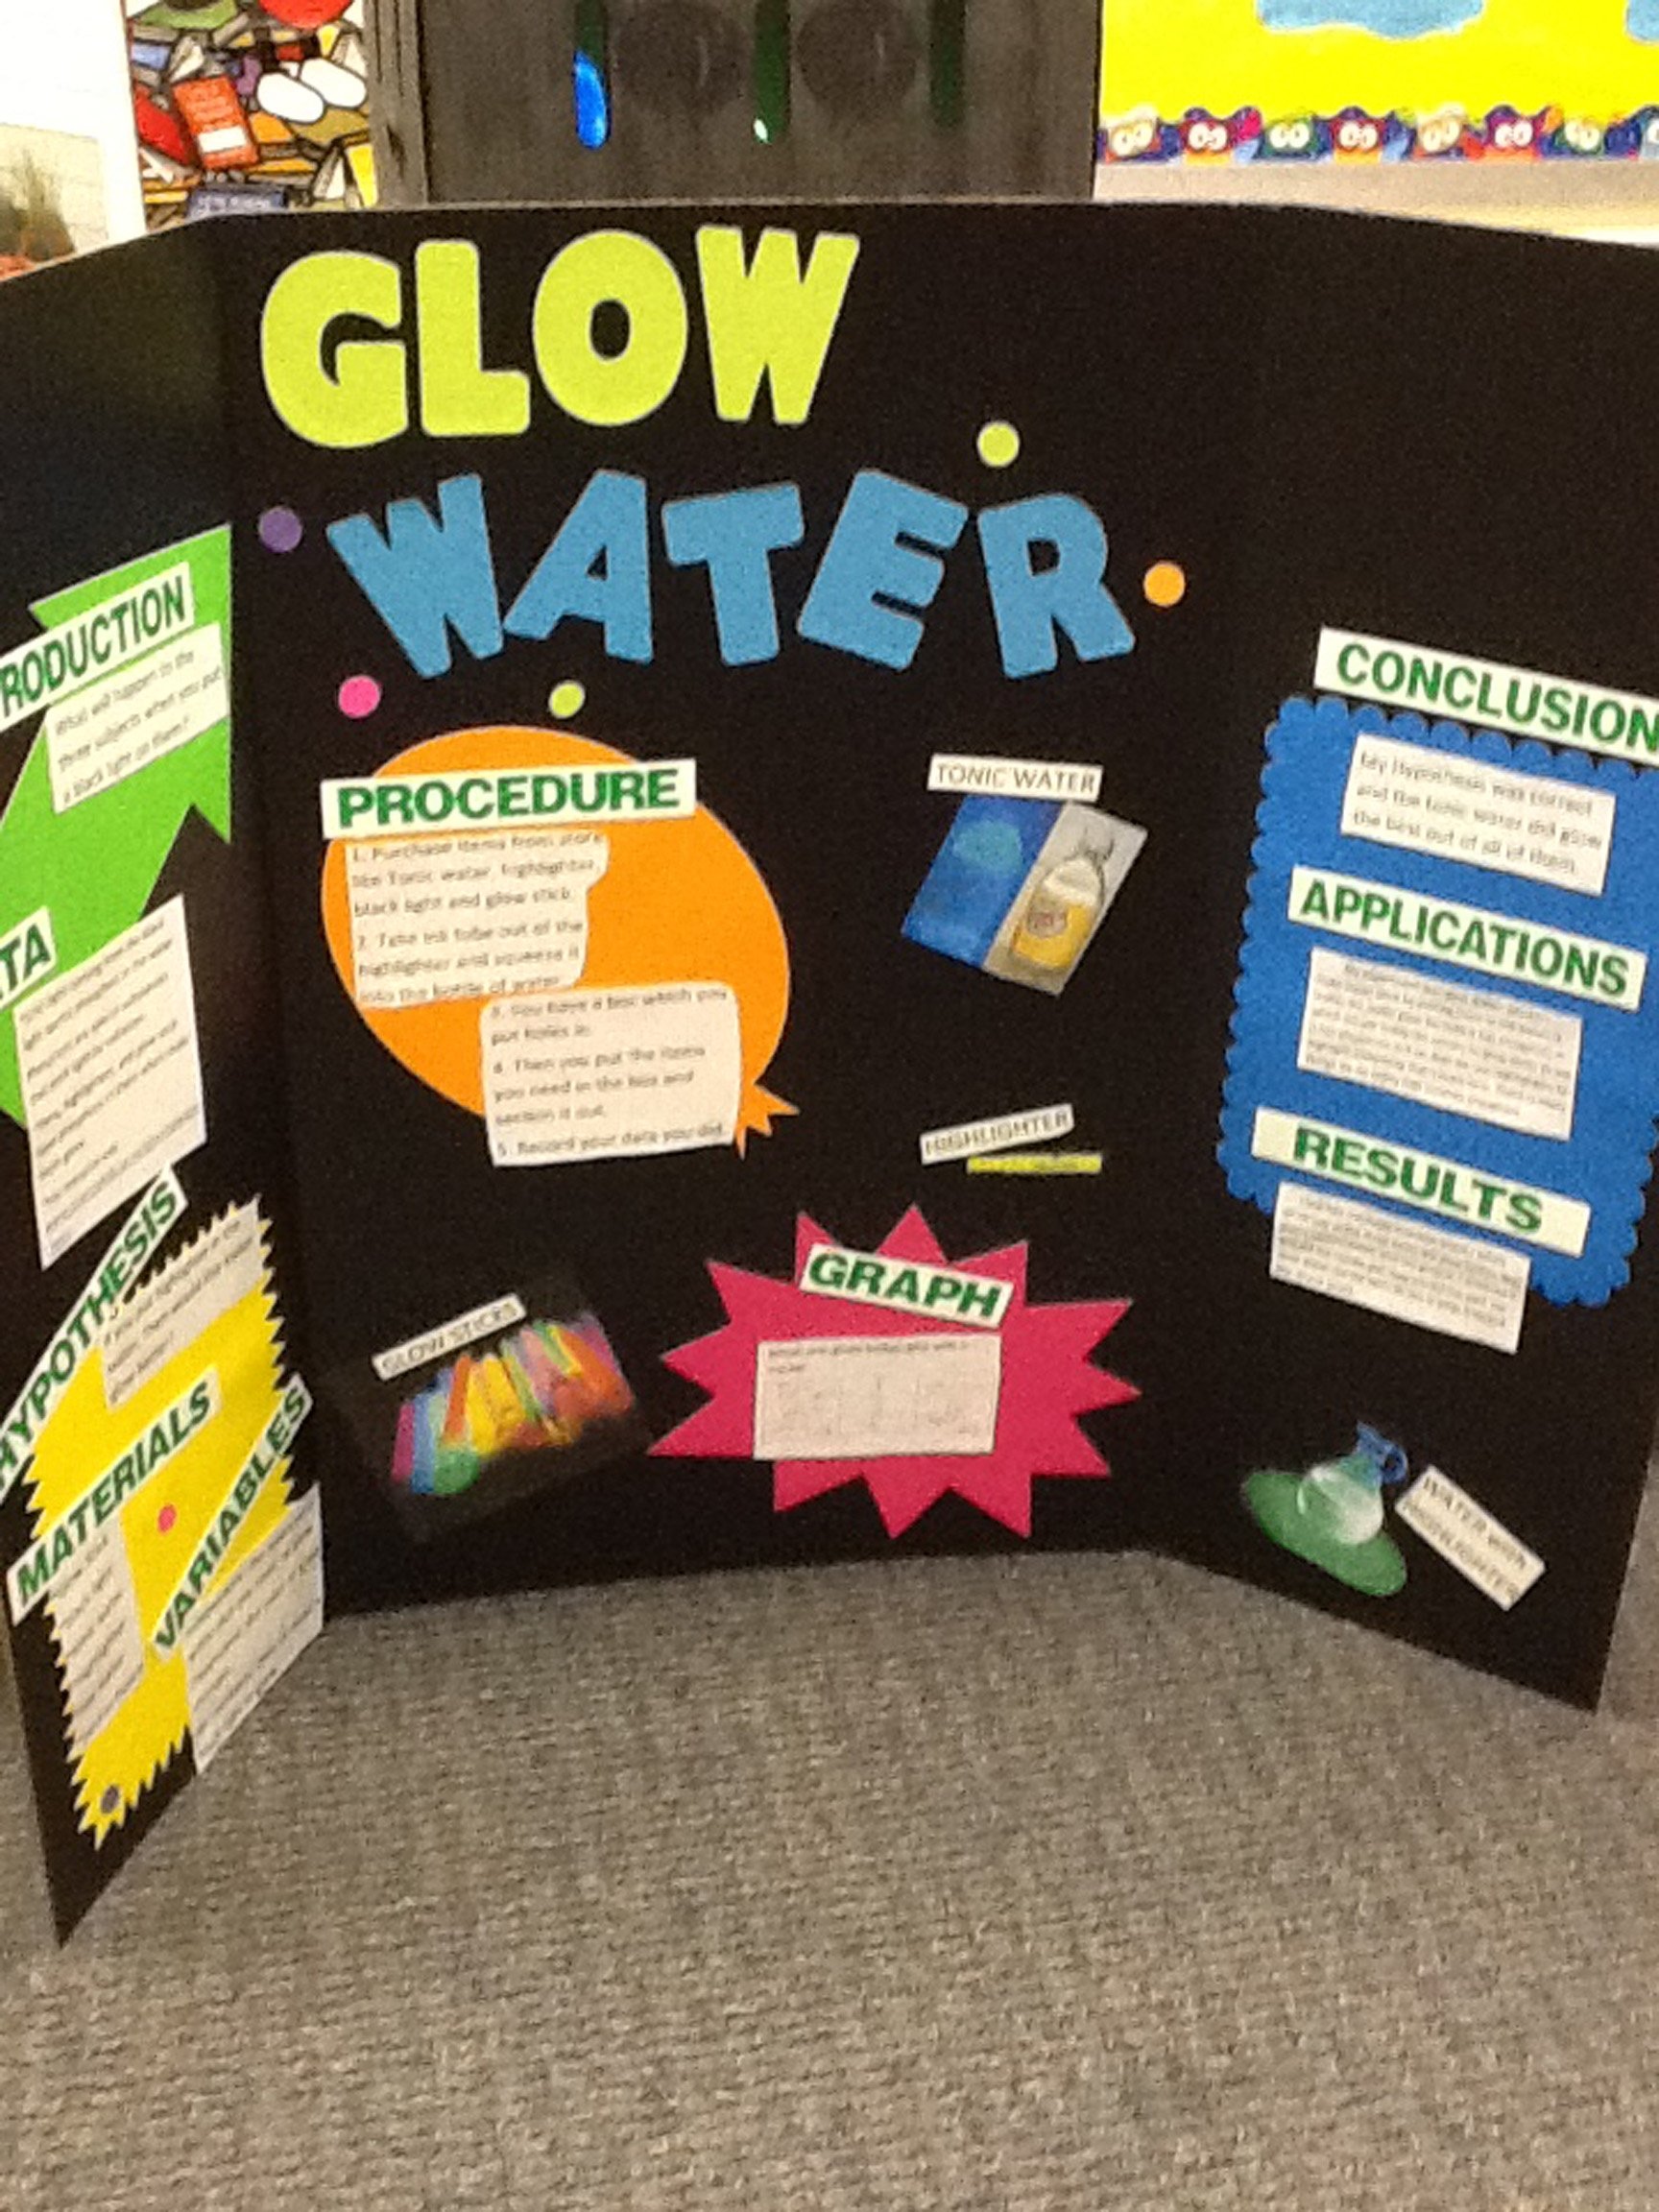 10 Amazing Ideas For Science Fair Projects For 6Th Grade sixth grade science fair projects coursework academic service 6 2022